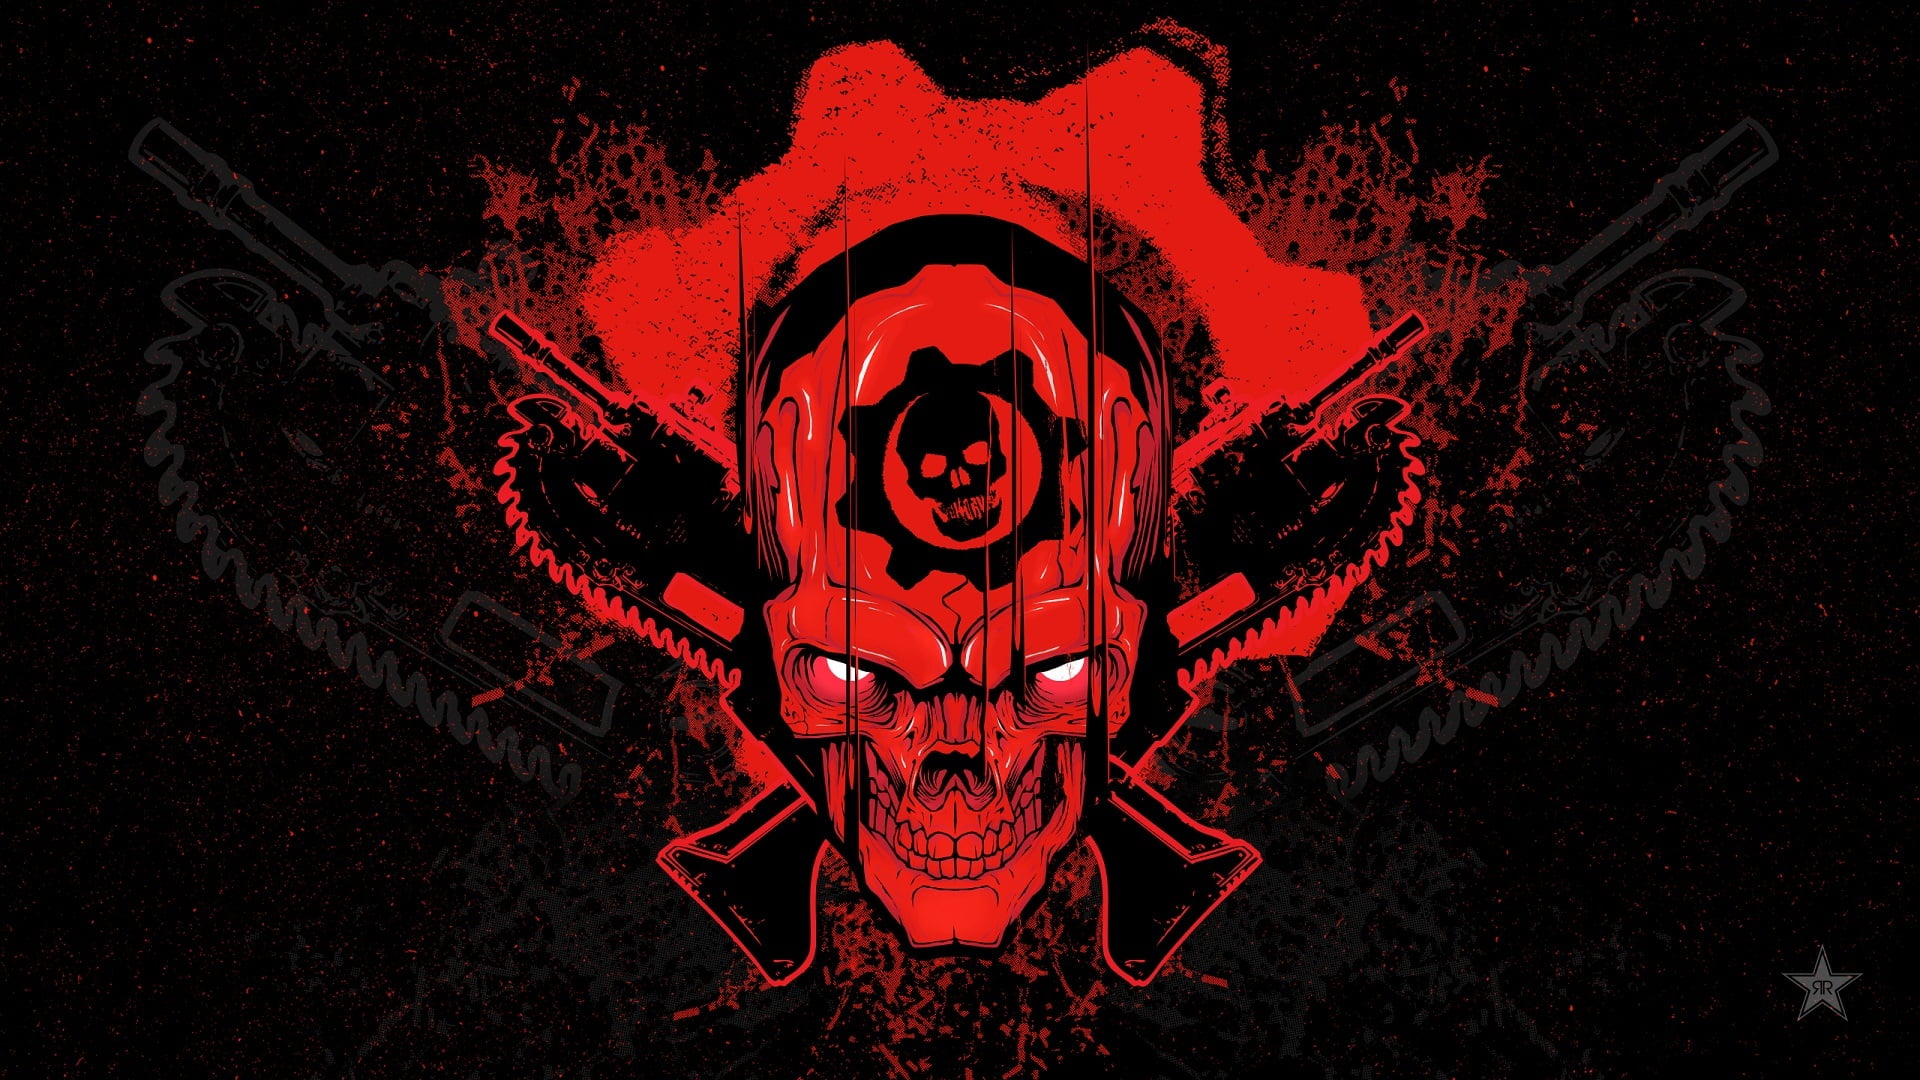 red skull illustration, Look, Emblem, Gears of War, Saw, Weapons